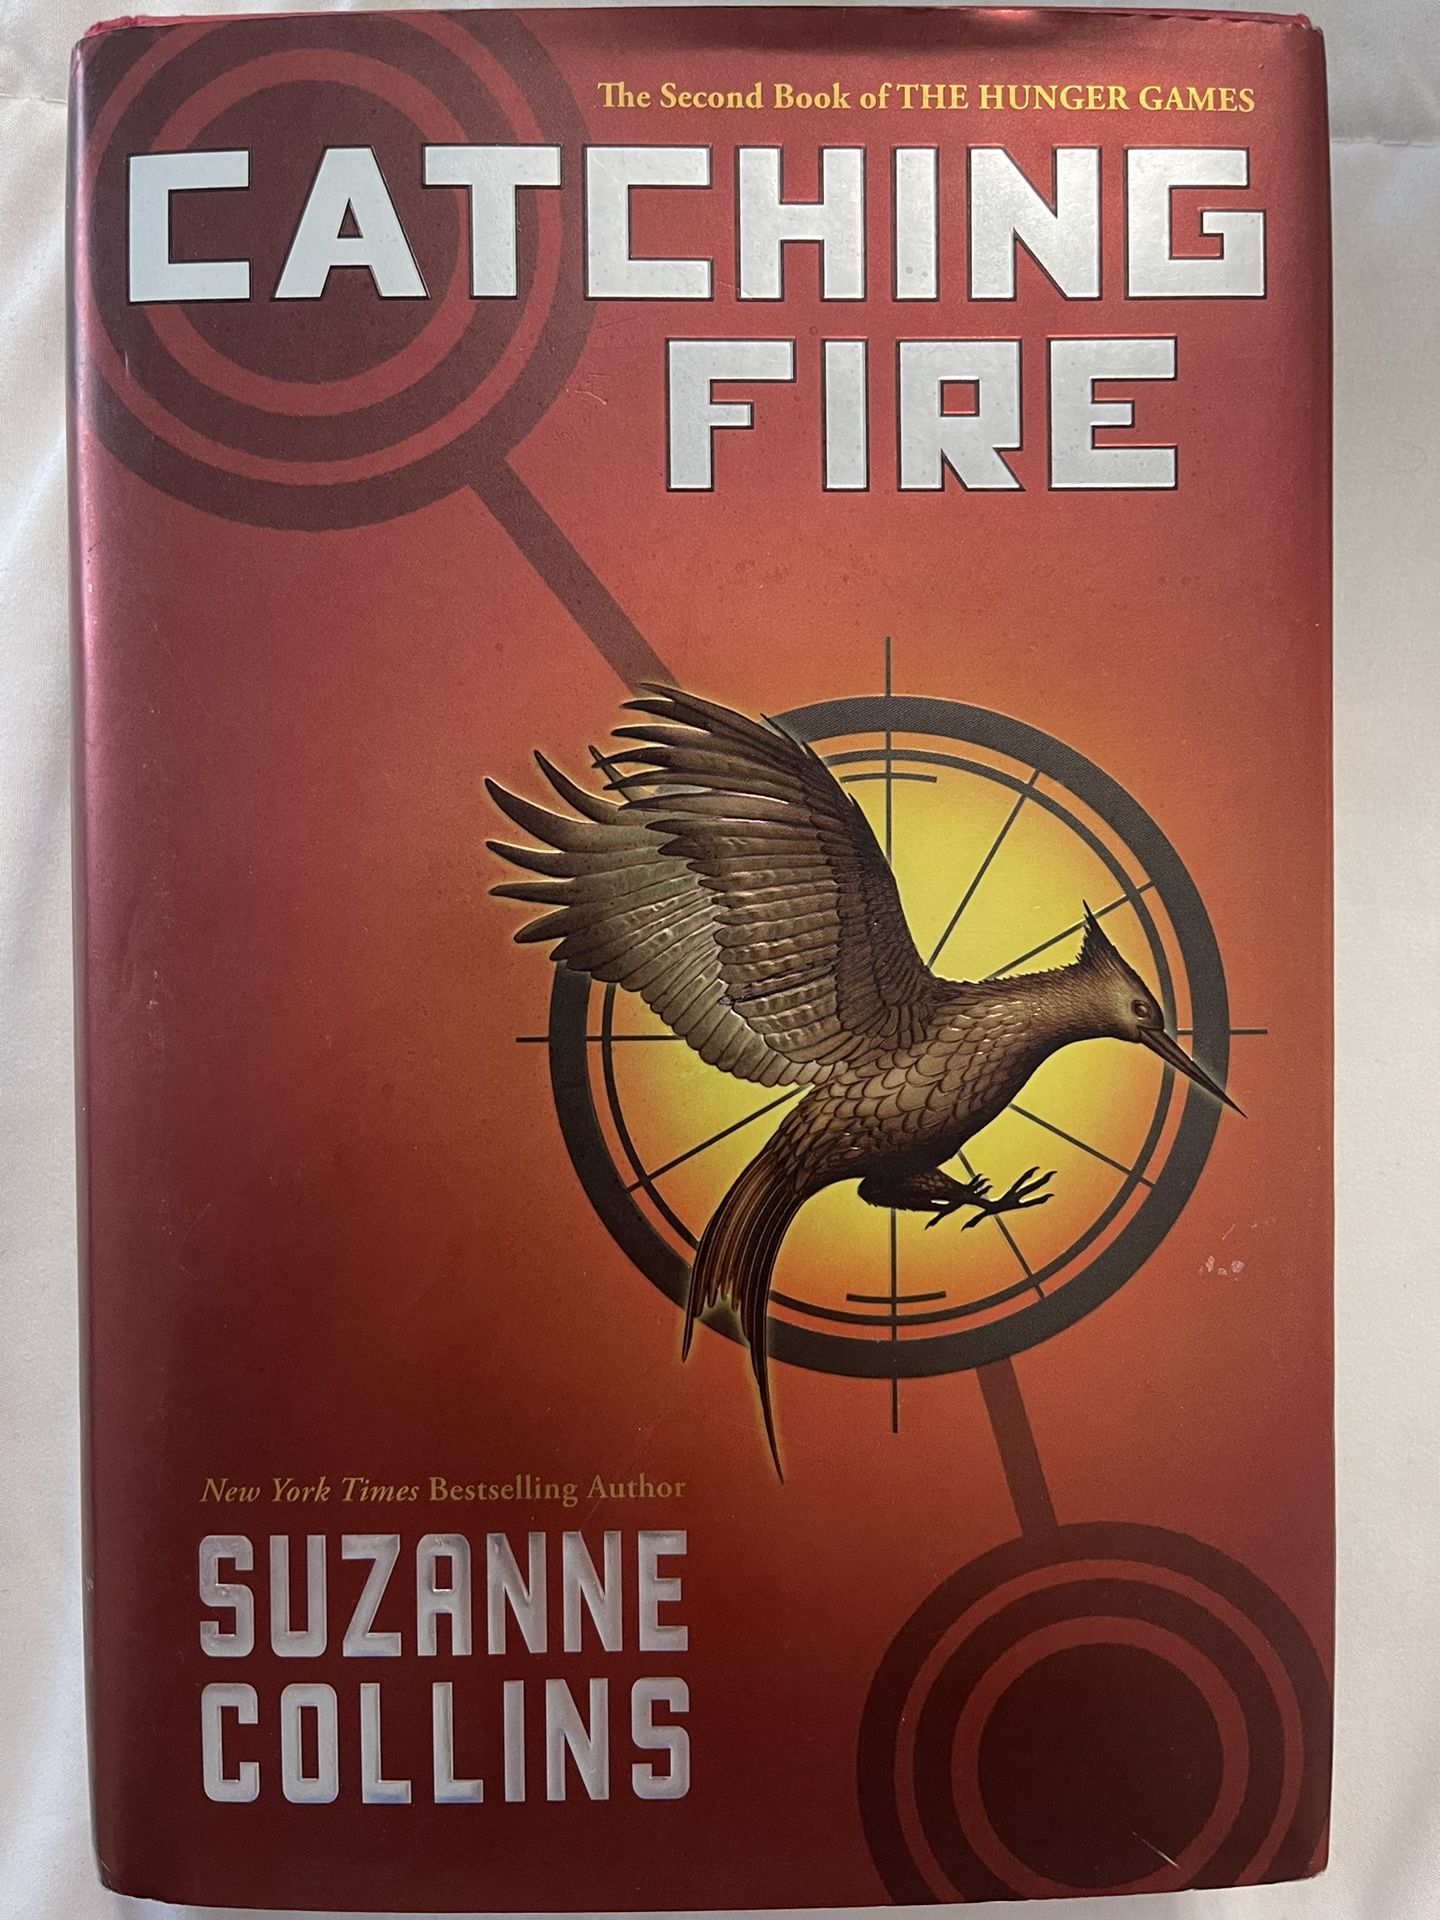 The Hunger Games: Catching Fire By Suzanne Collins